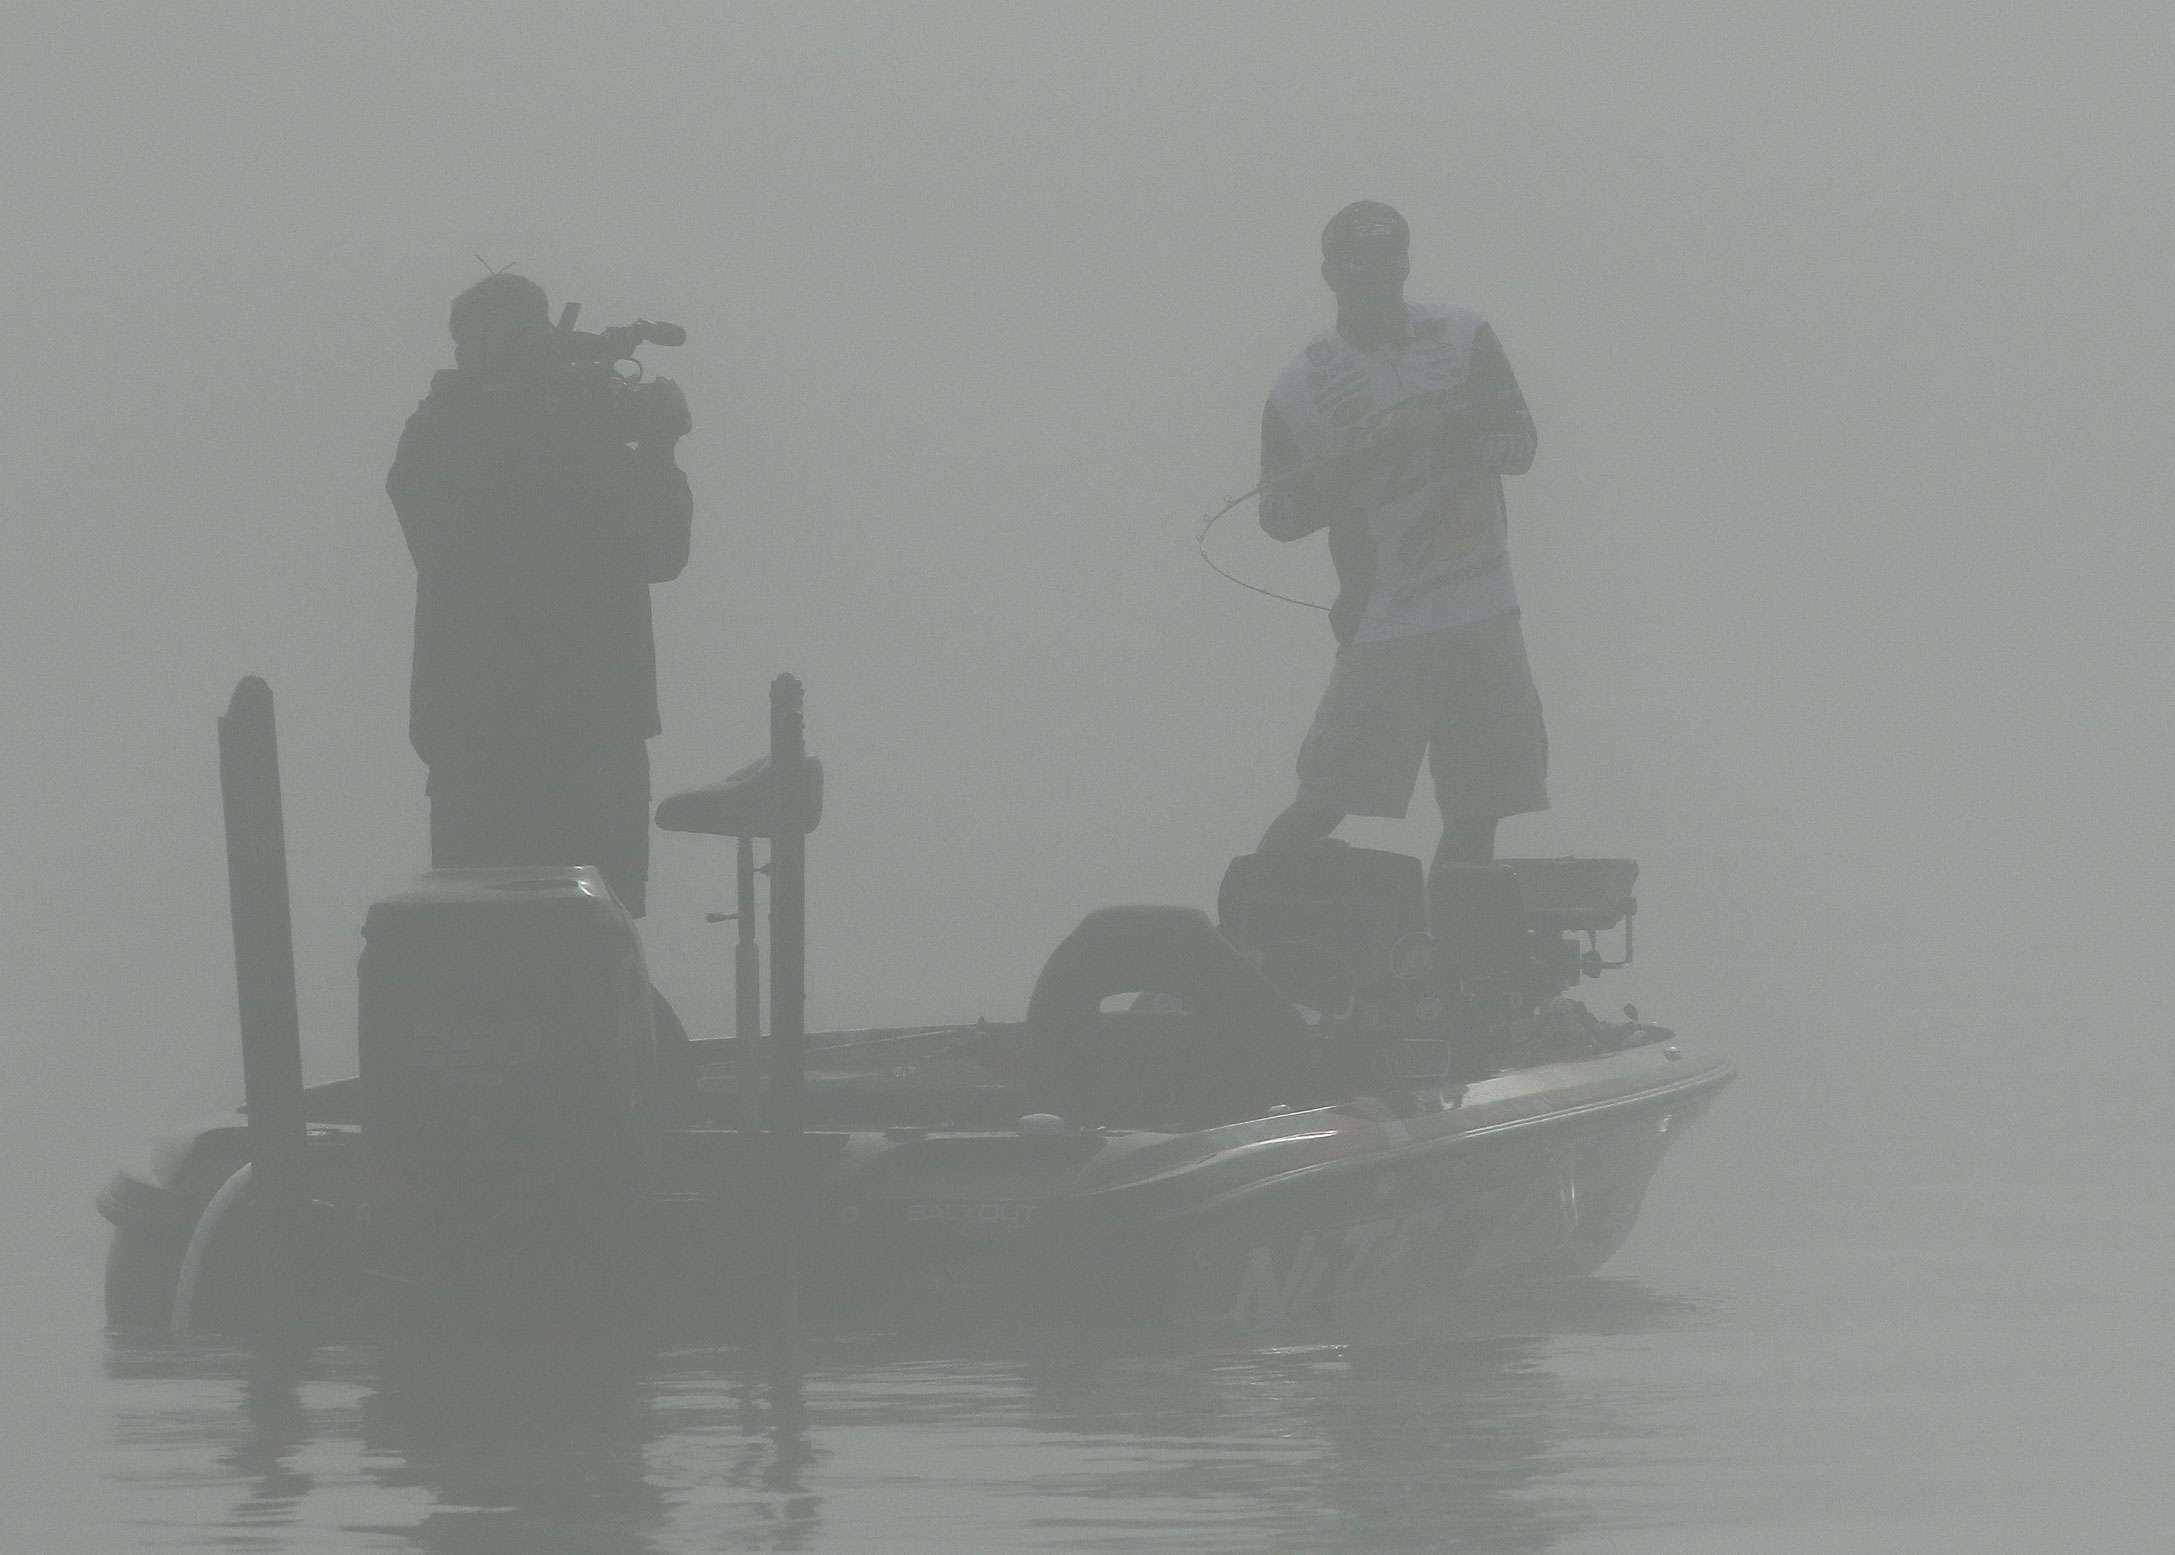 The thick fog didn't slow the fish, though.